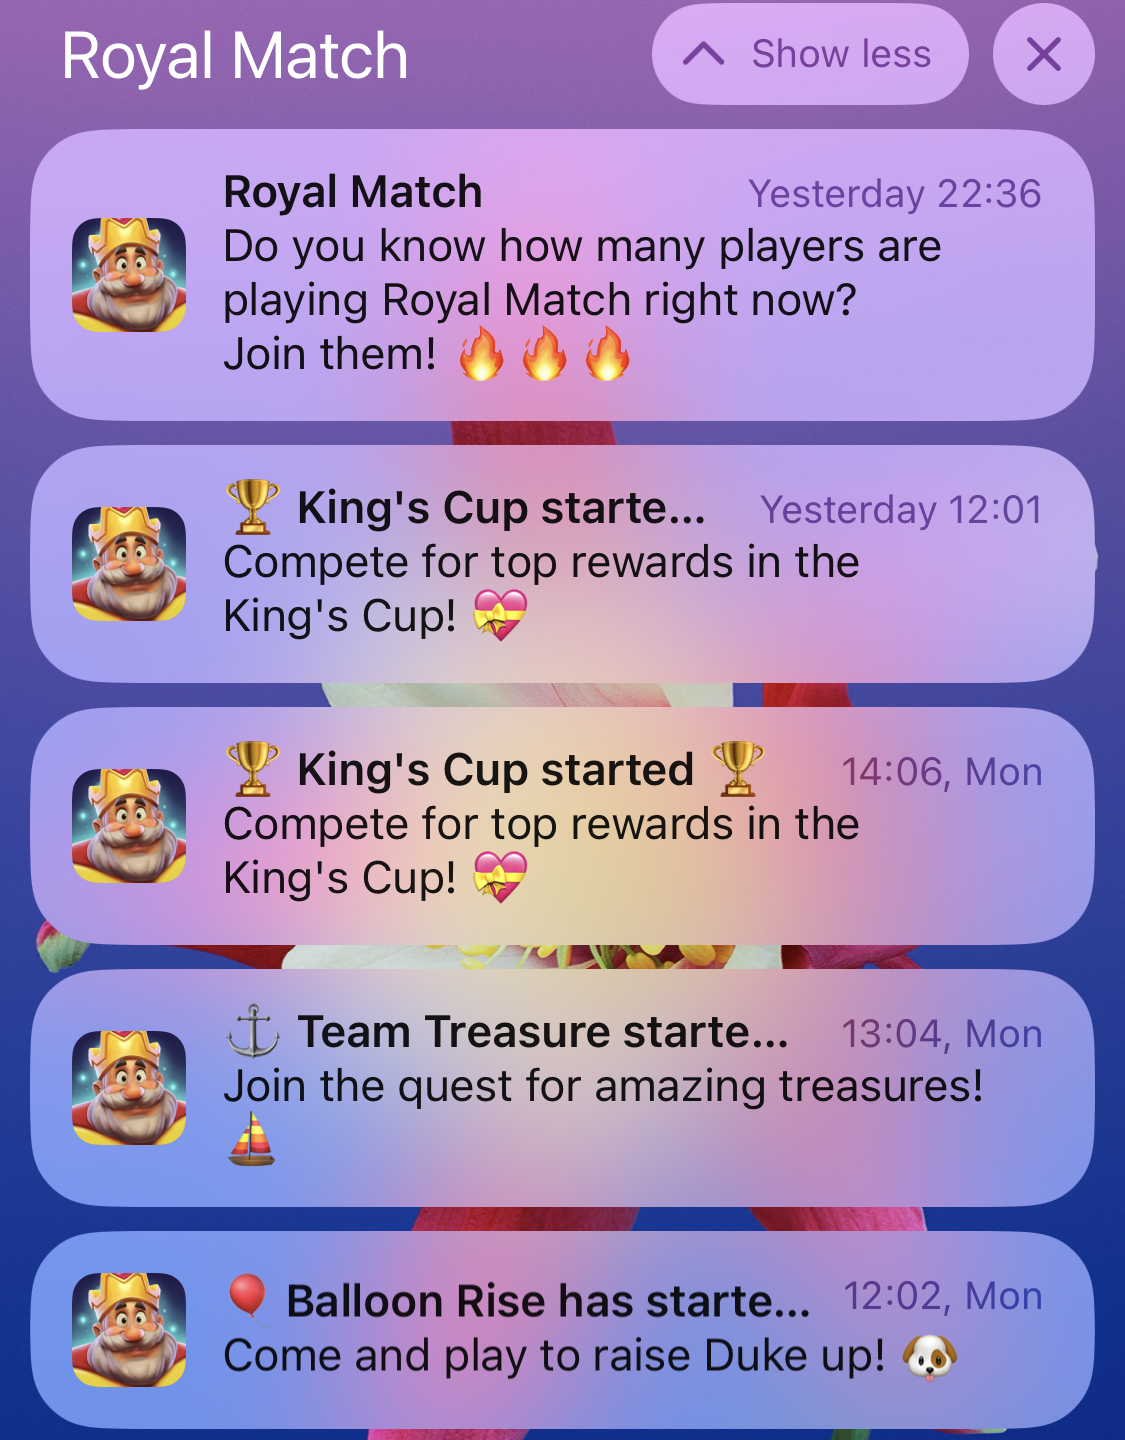 Events announcements through push notifications from Royal Match by Dream Games